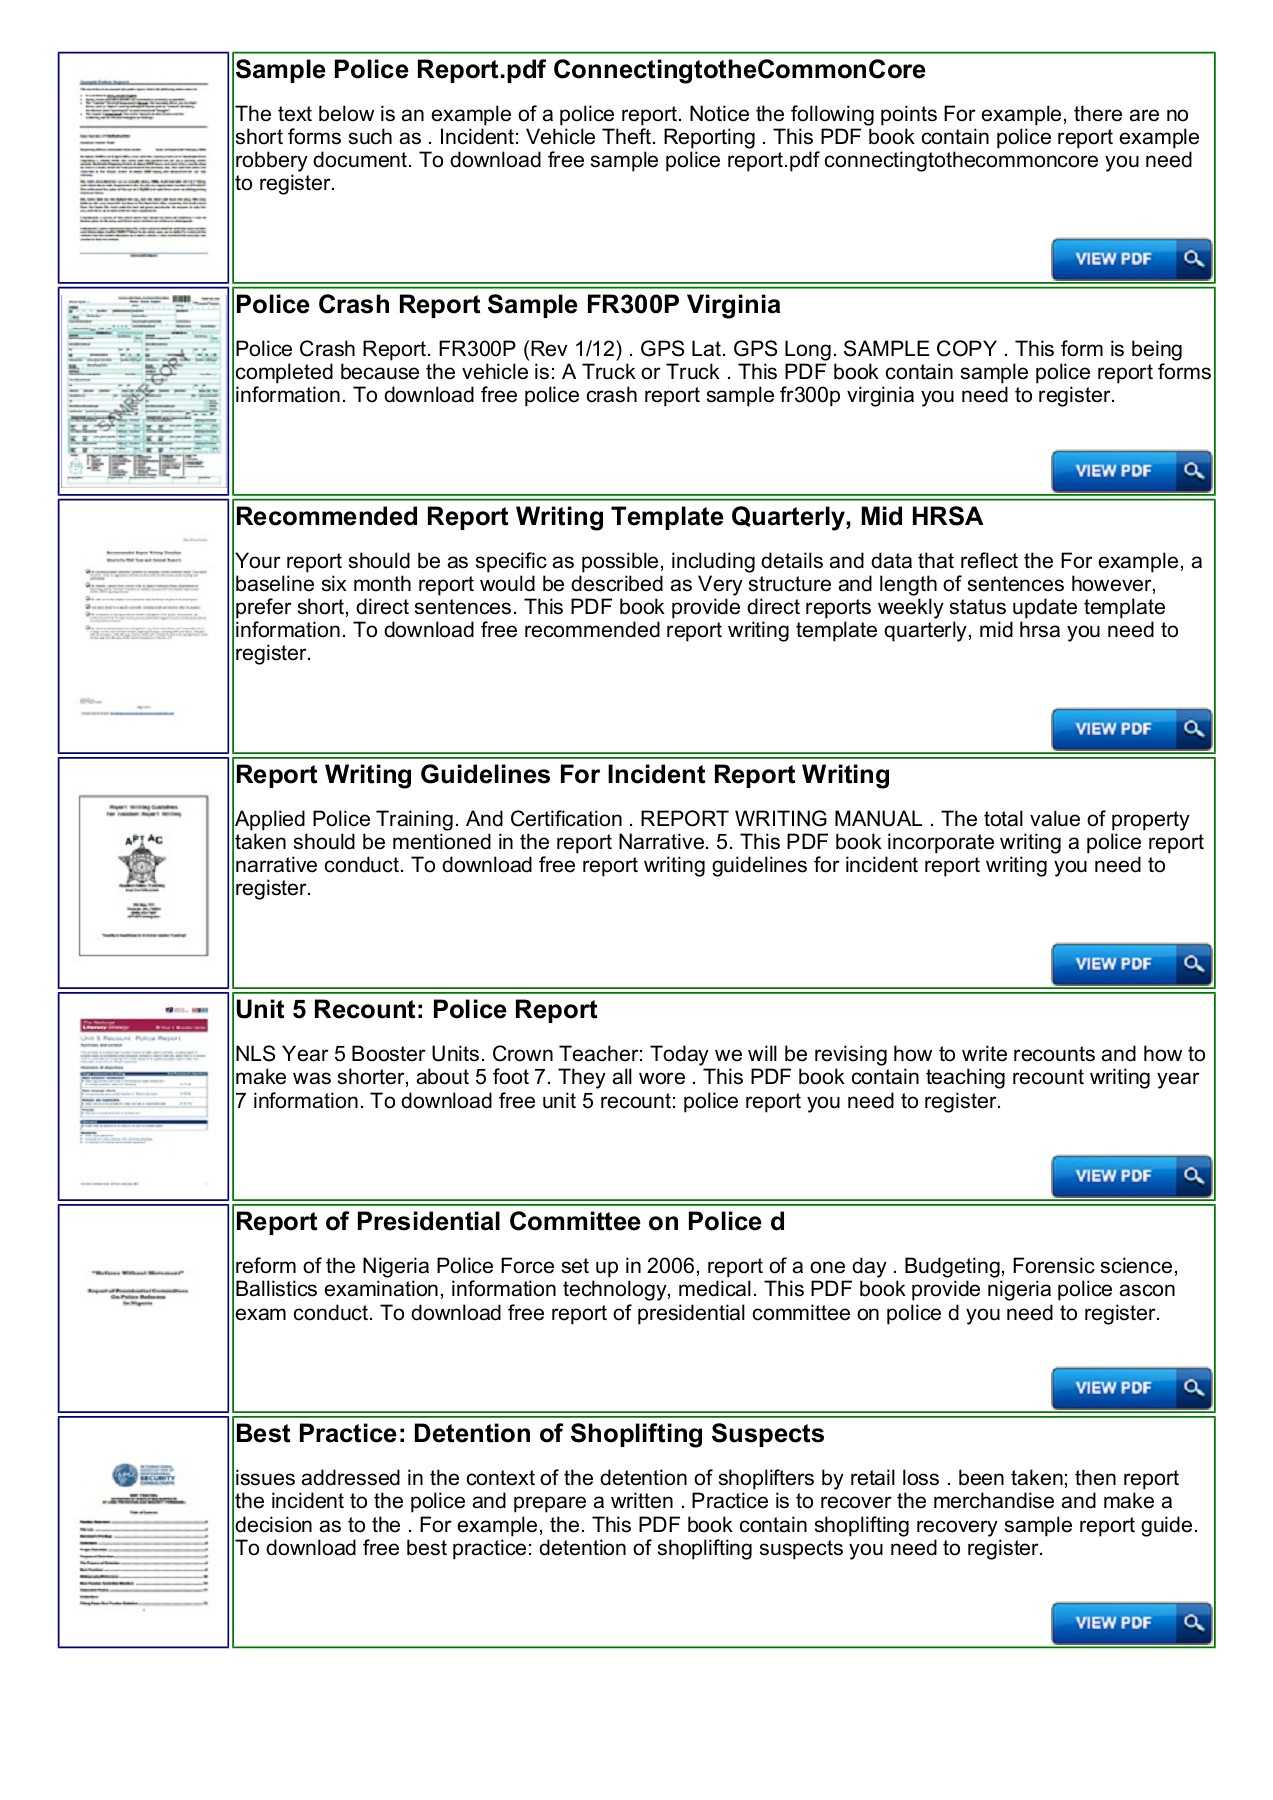 Police Shoplifting Report Writing Template Sample Pages 1 In Police Report Template Pdf